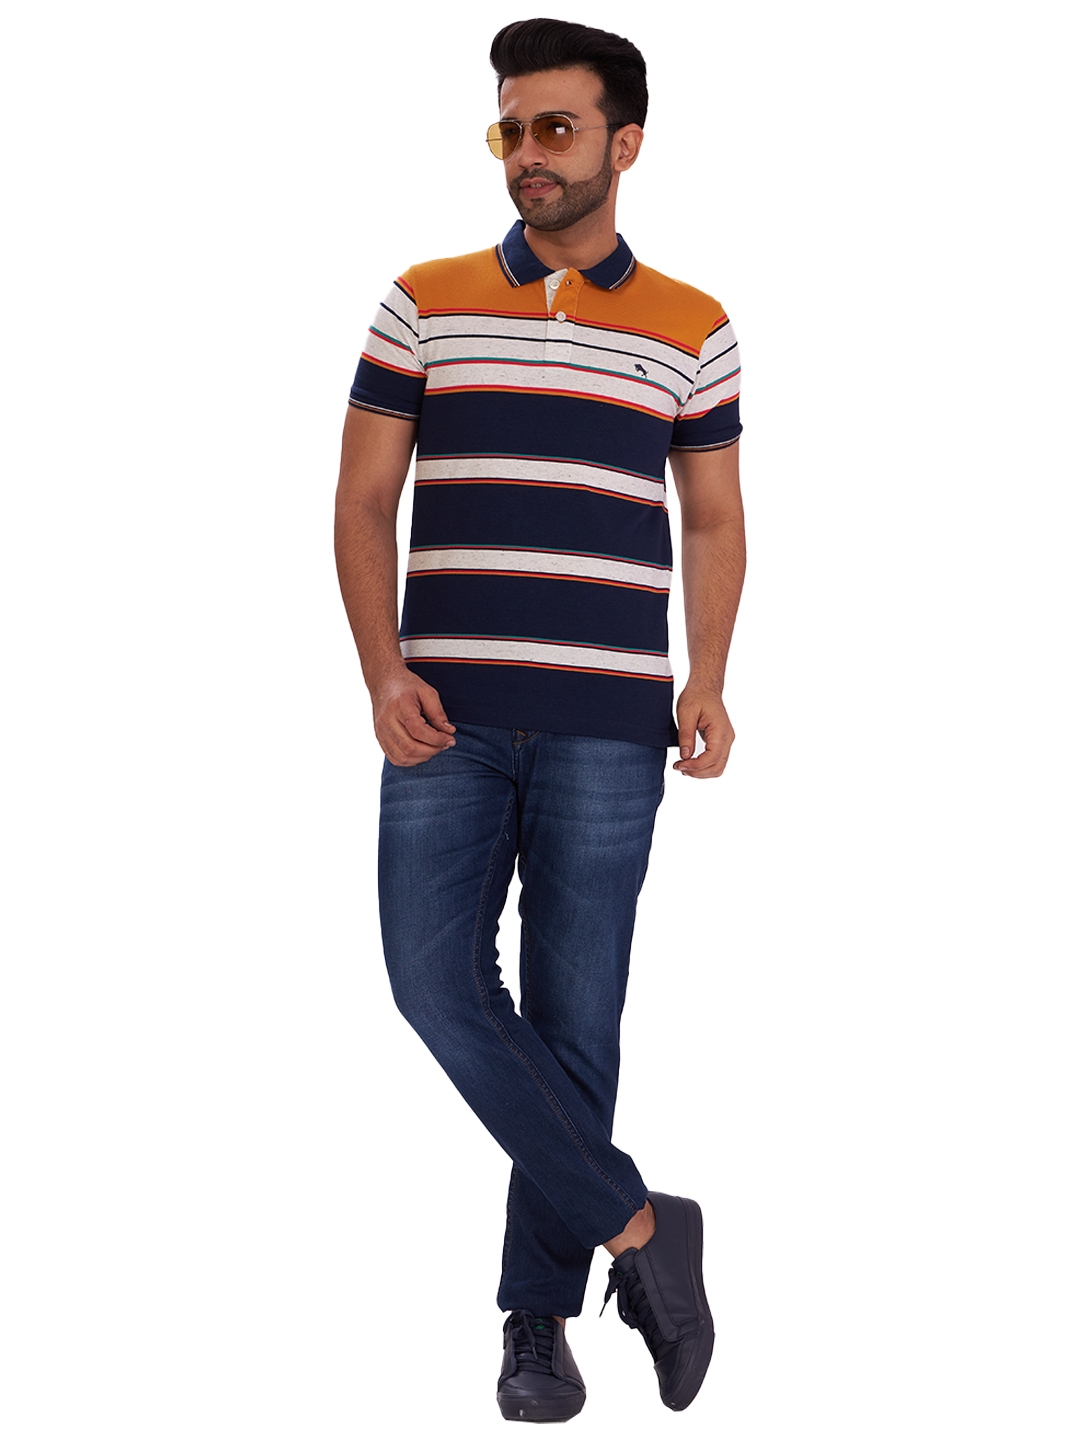 D'cot by Donear | D'cot by Donear Men's Multi Polycotton T-Shirts 4